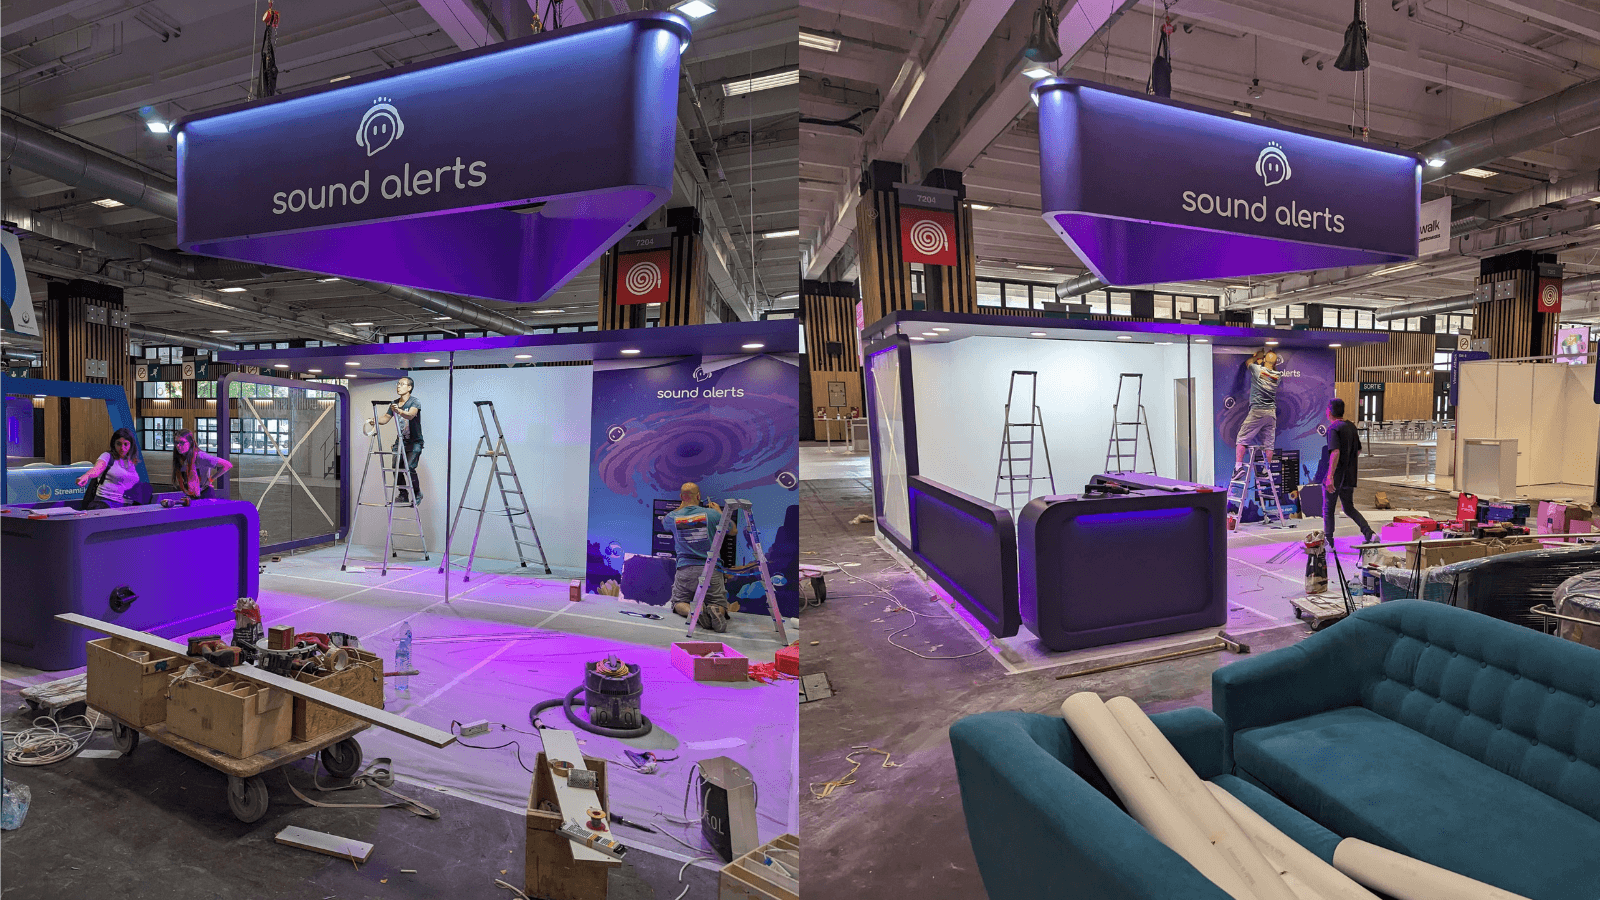 This image shows the early construction phase of the Sound Alerts booth at TwitchCon Paris